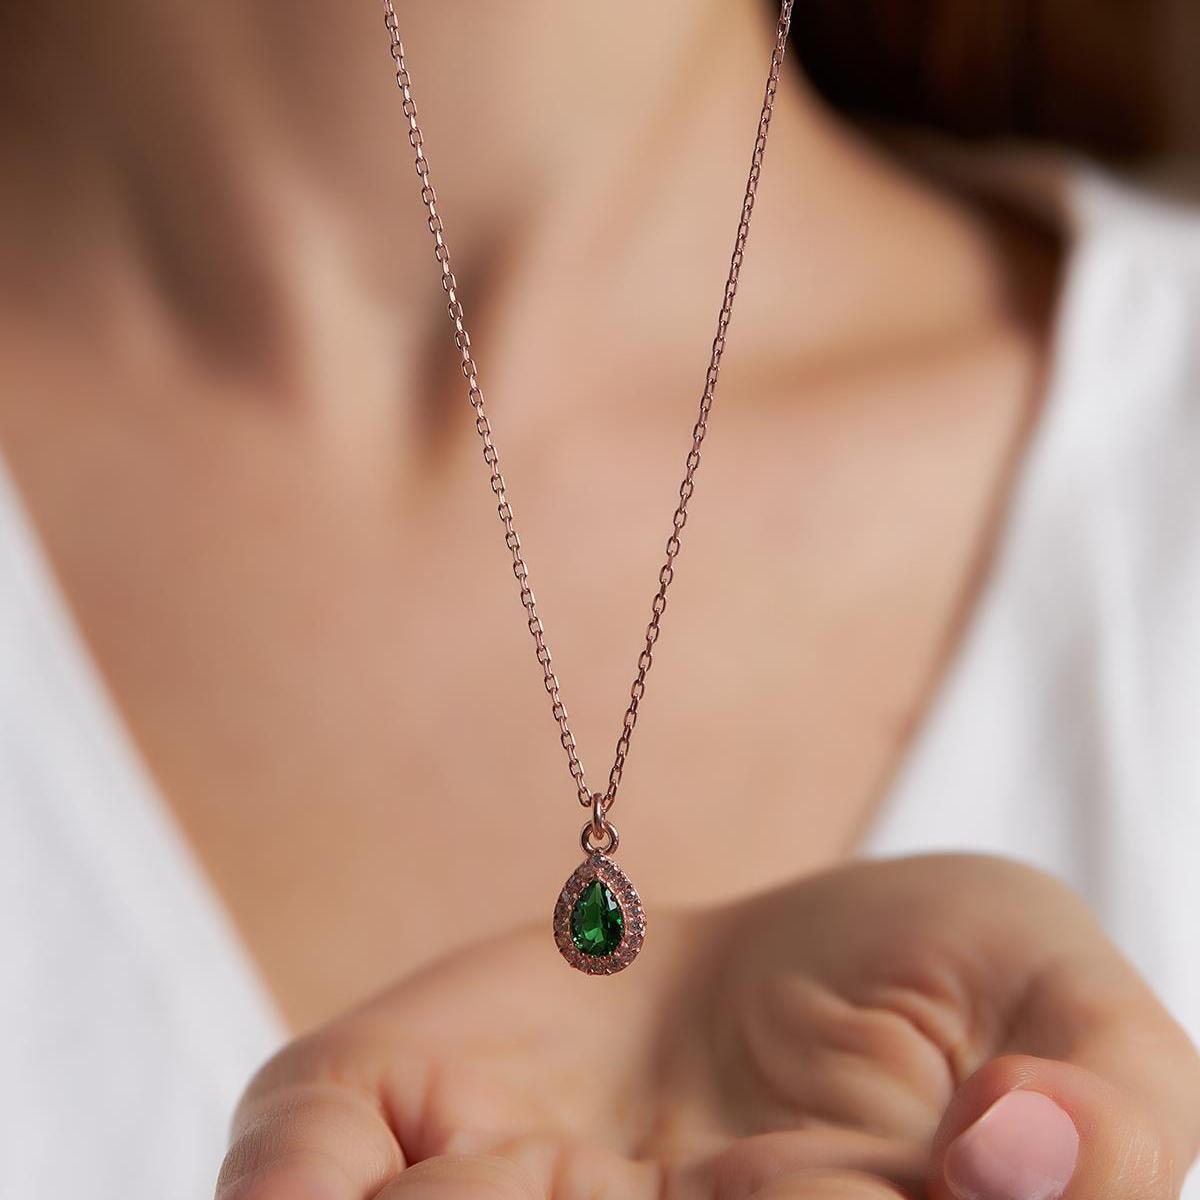 Teardrop Emerald Necklace • Emerald May Birthstone Necklace - Trending Silver Gifts